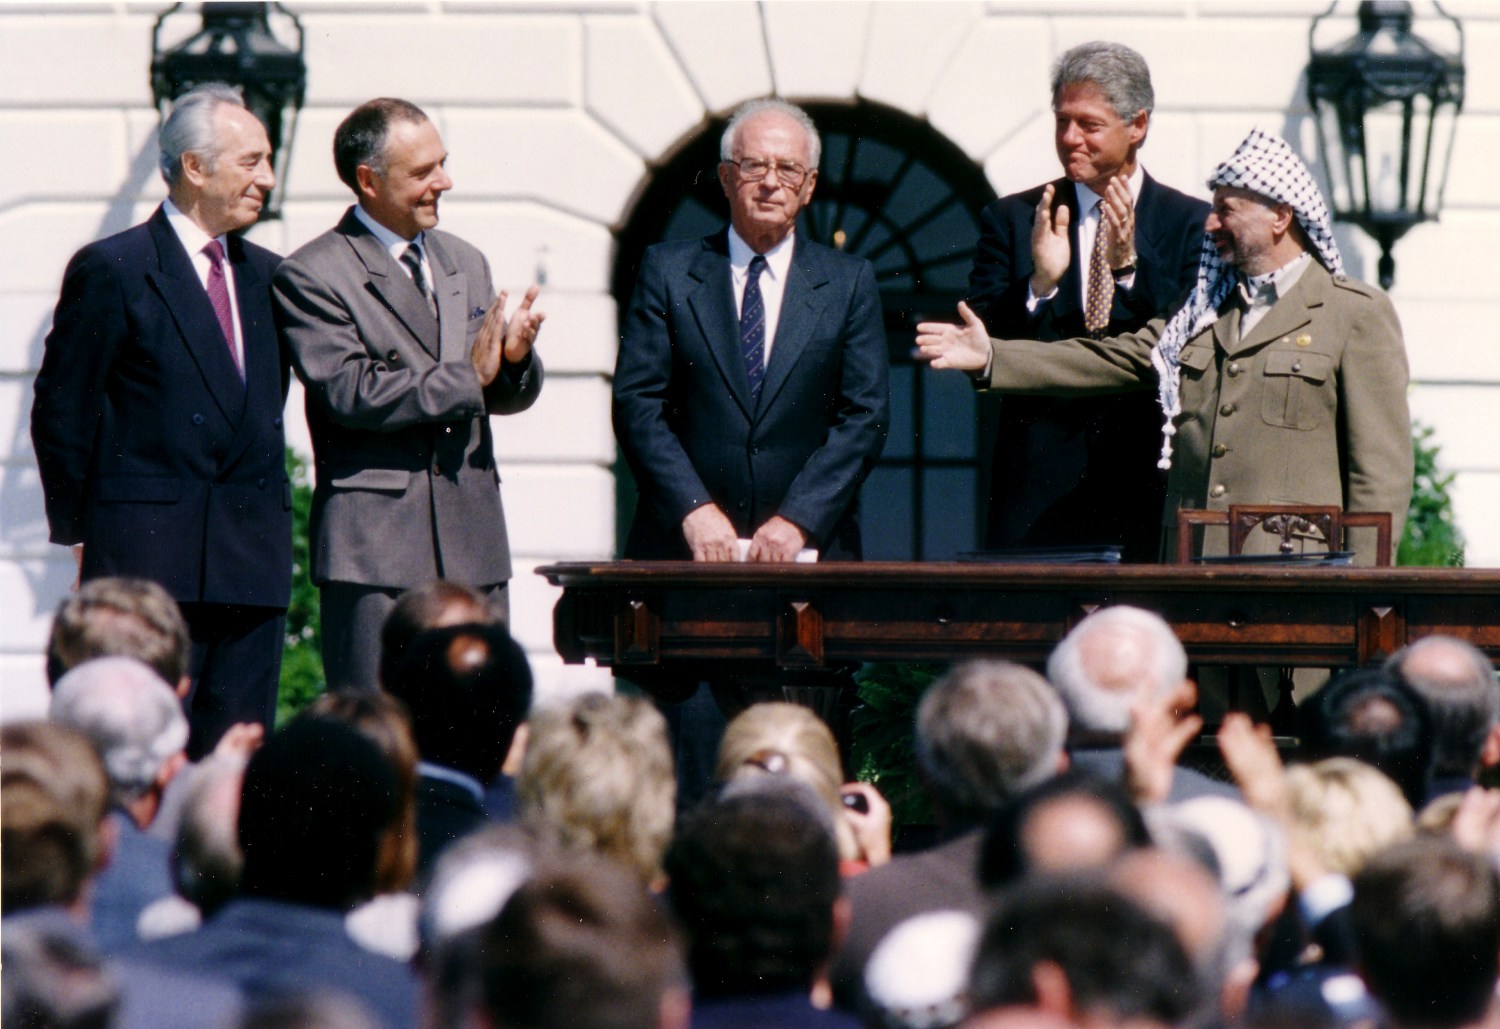 PLO Chairman Yasser Arafat (R) gestures to Israeli Prime Minister Yitzhak Rabin (3rd R), as U.S. President Bill Clinton (2nd R) stands between them, following their handshake after the signing of the Israeli-PLO peace accord, at the White House in Washington September 13, 1993. Also in picture is Israeli Foreign Minister Shimon Peres (L). REUTERS/Gary Hershorn (UNITED STATES - Tags: POLITICS) - GM1E99E00JX01